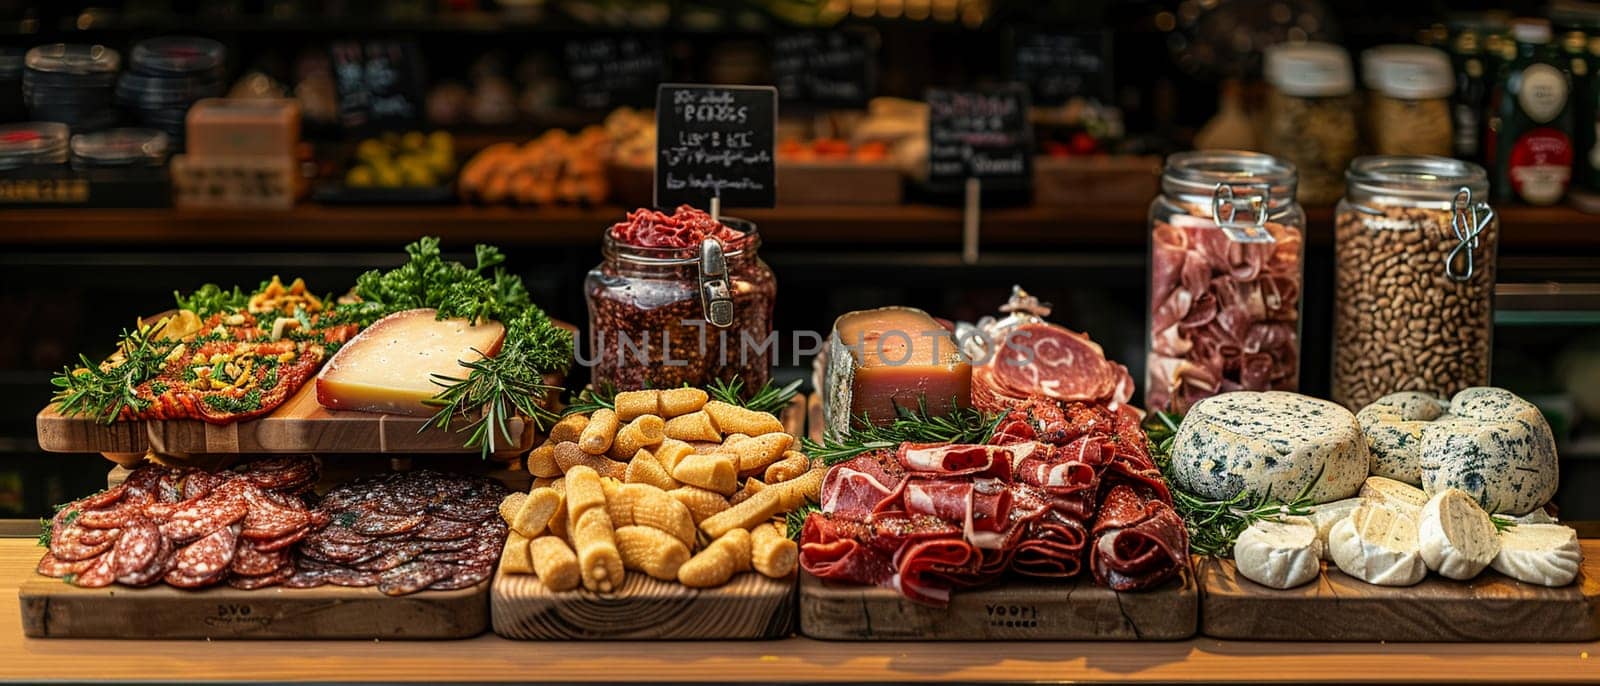 Delicatessen Showcases Specialty Selections in Business of Gourmet Delights, Deli counters and specialty meats showcase a narrative of specialty selections and gourmet delights in the delicatessen business.